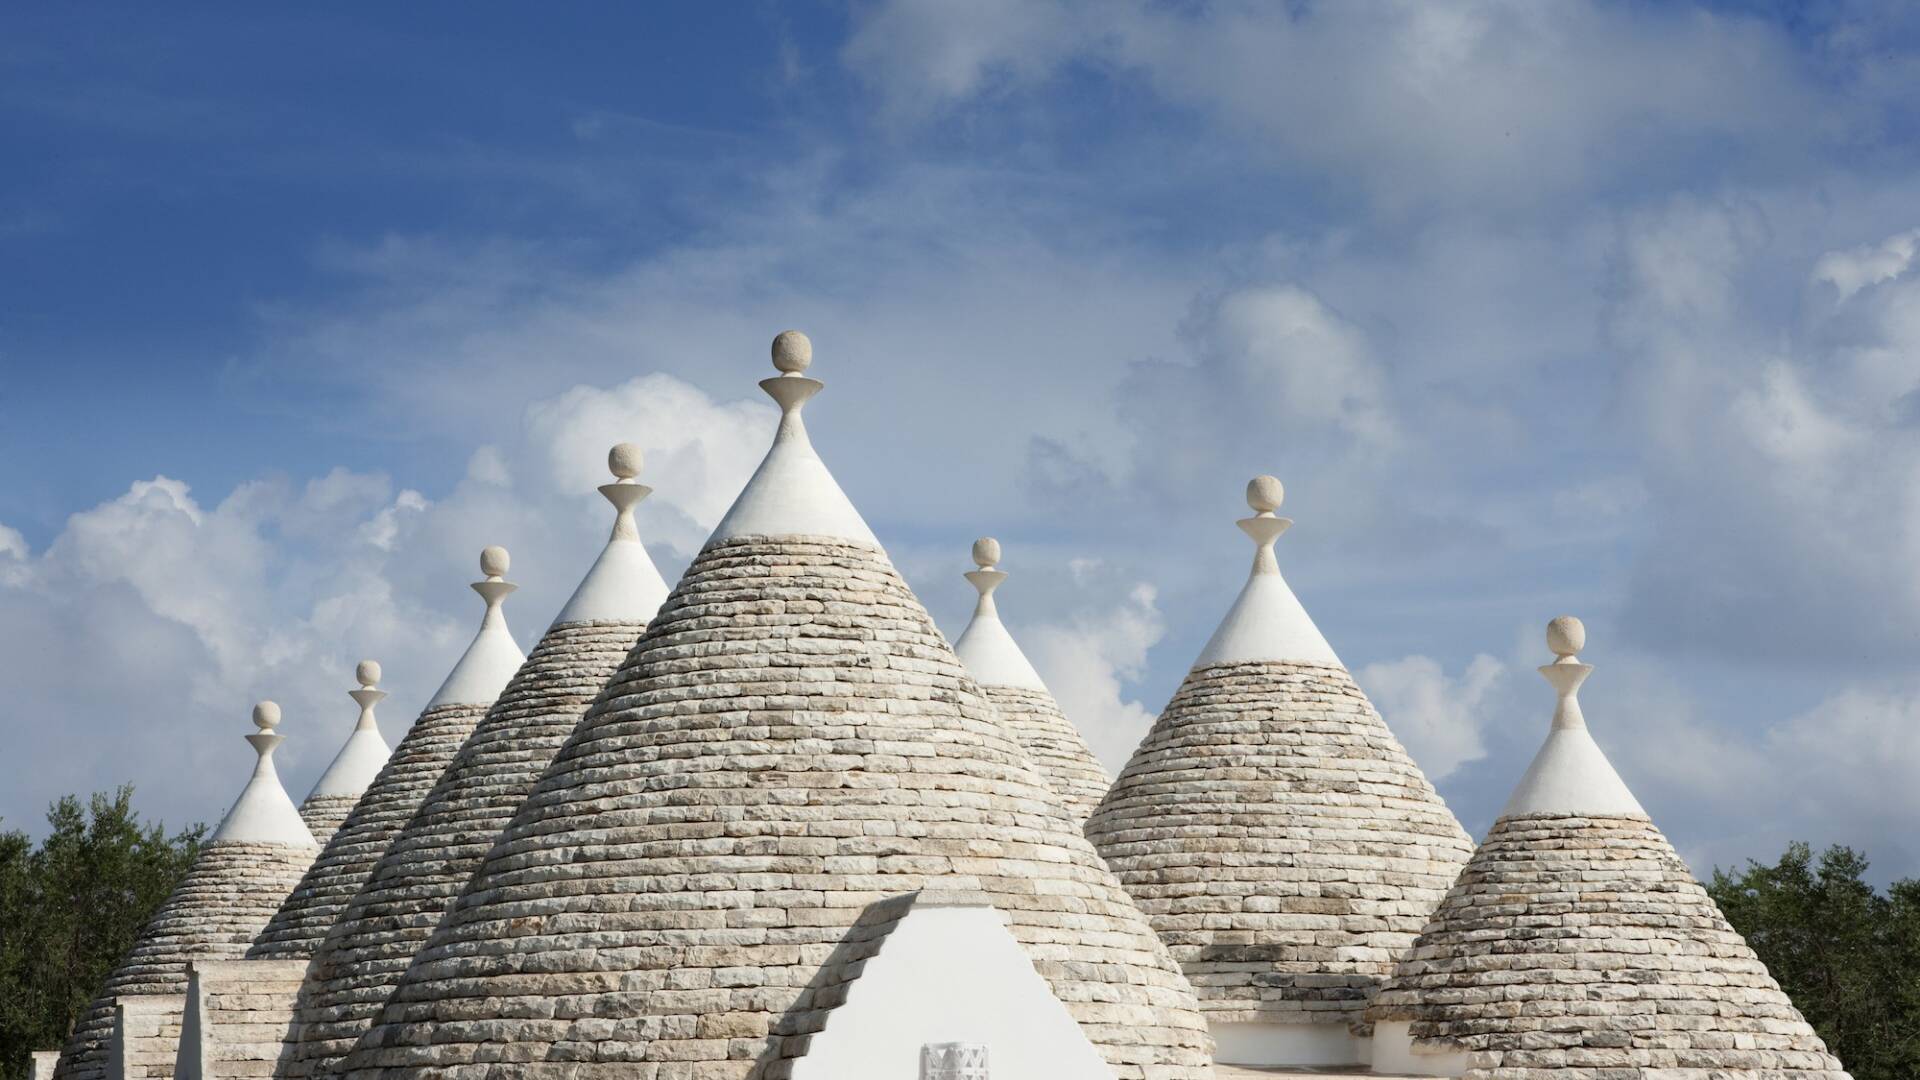 trulli, roof-cone houses